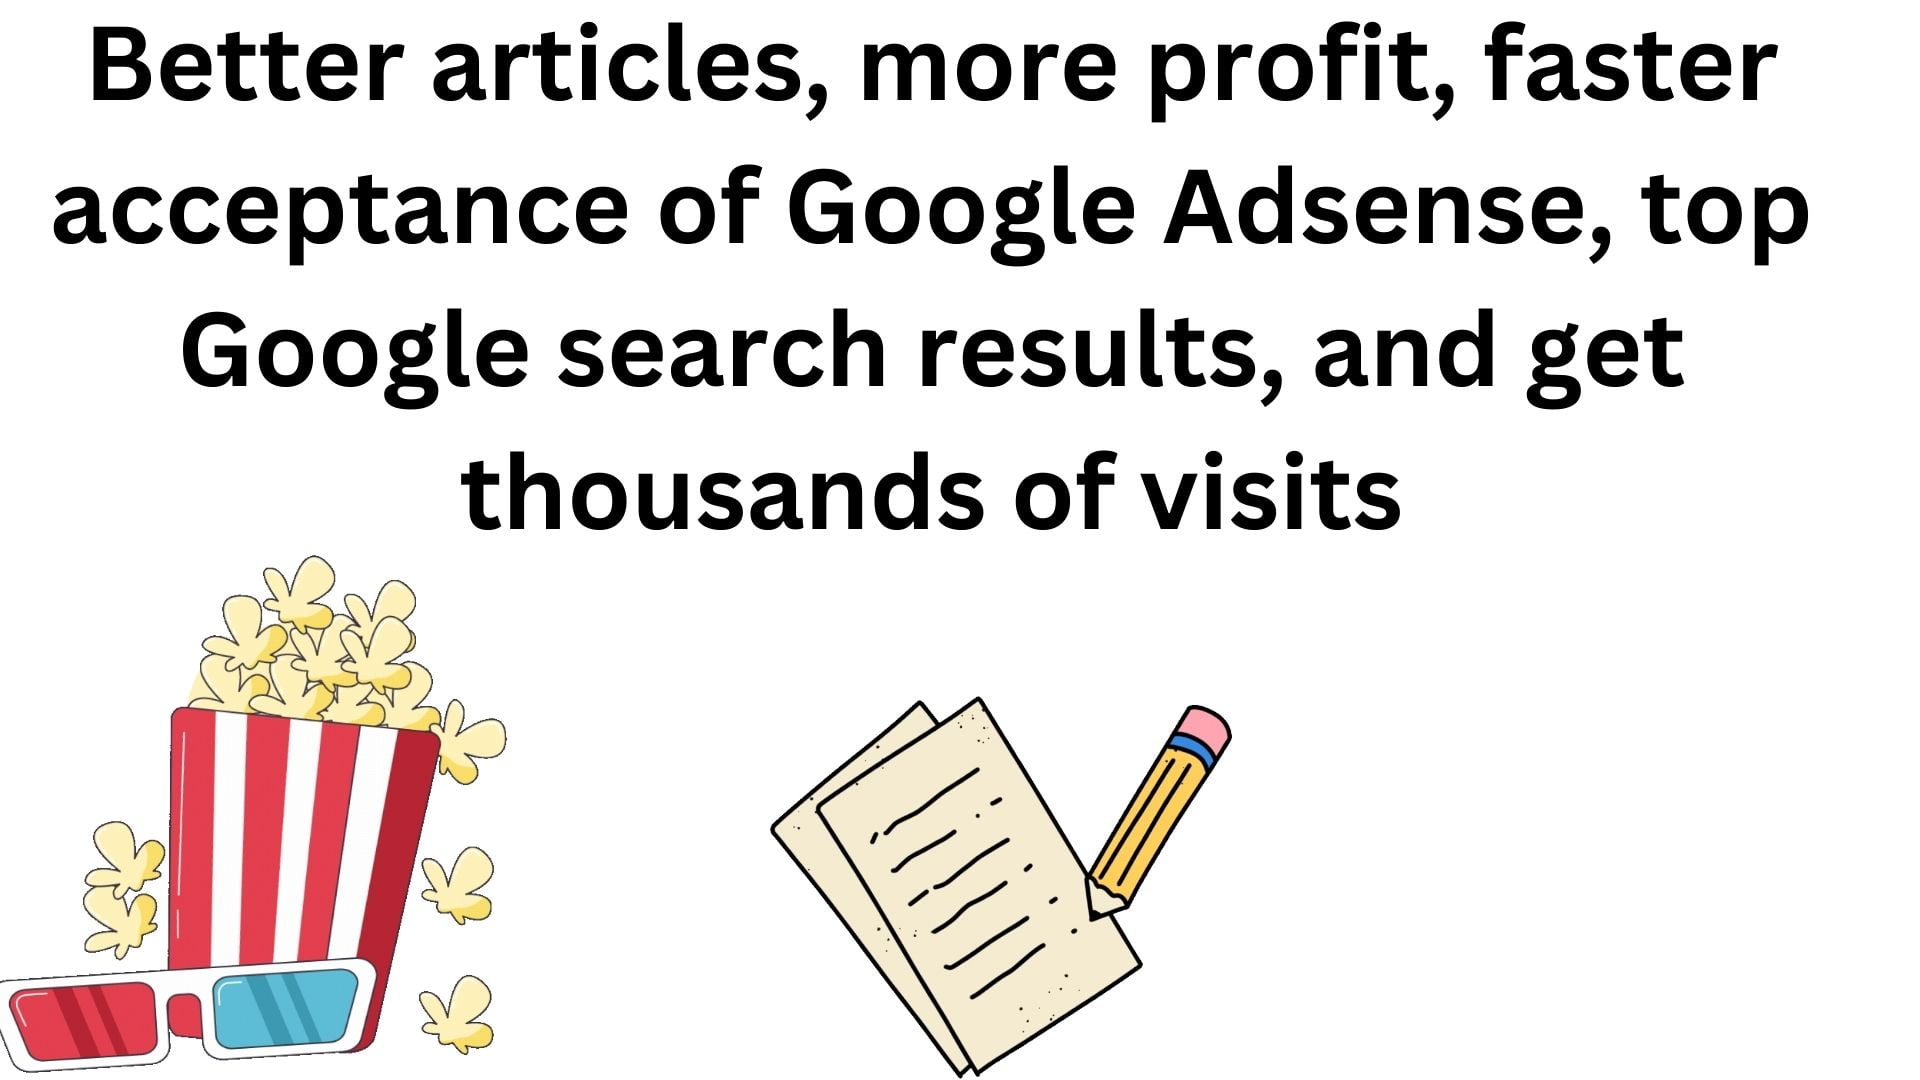 Better Articles, More Profit, Faster Acceptance Of Google Adsense, Top Google Search Results, And Get Thousands Of Visits